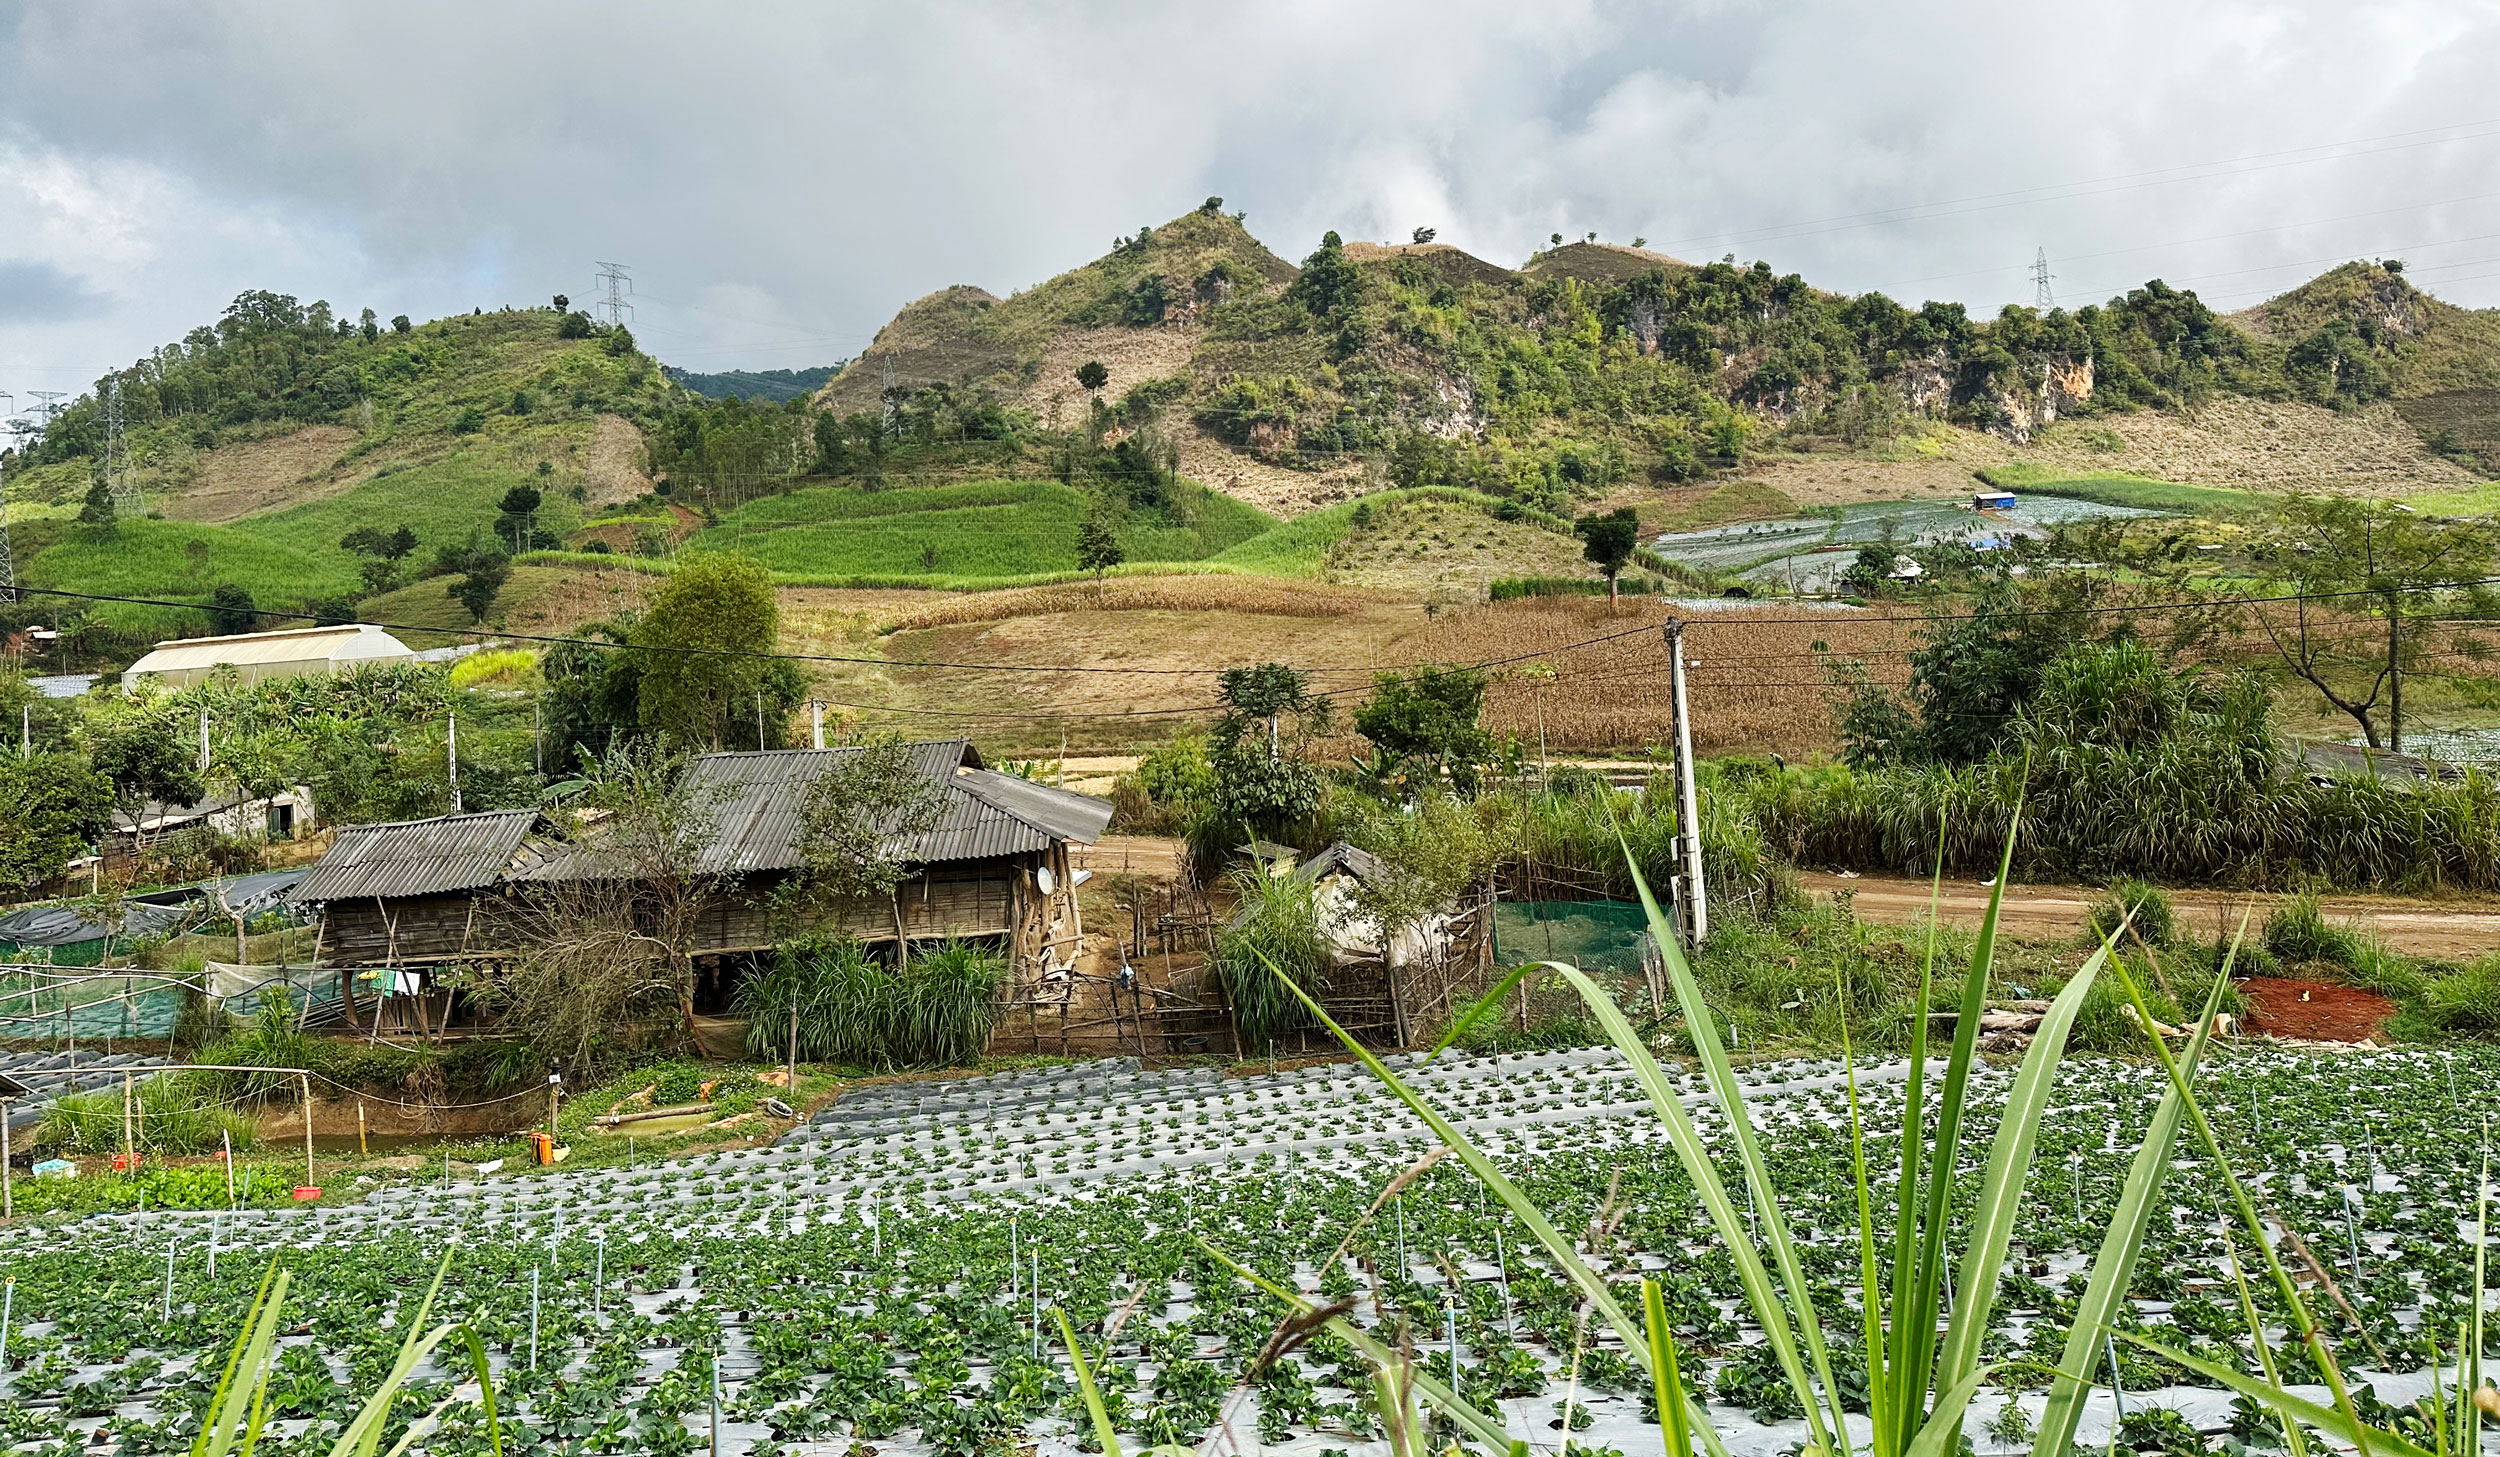 Upland agroforestry for incomes and carbon sequestration in Vietnam